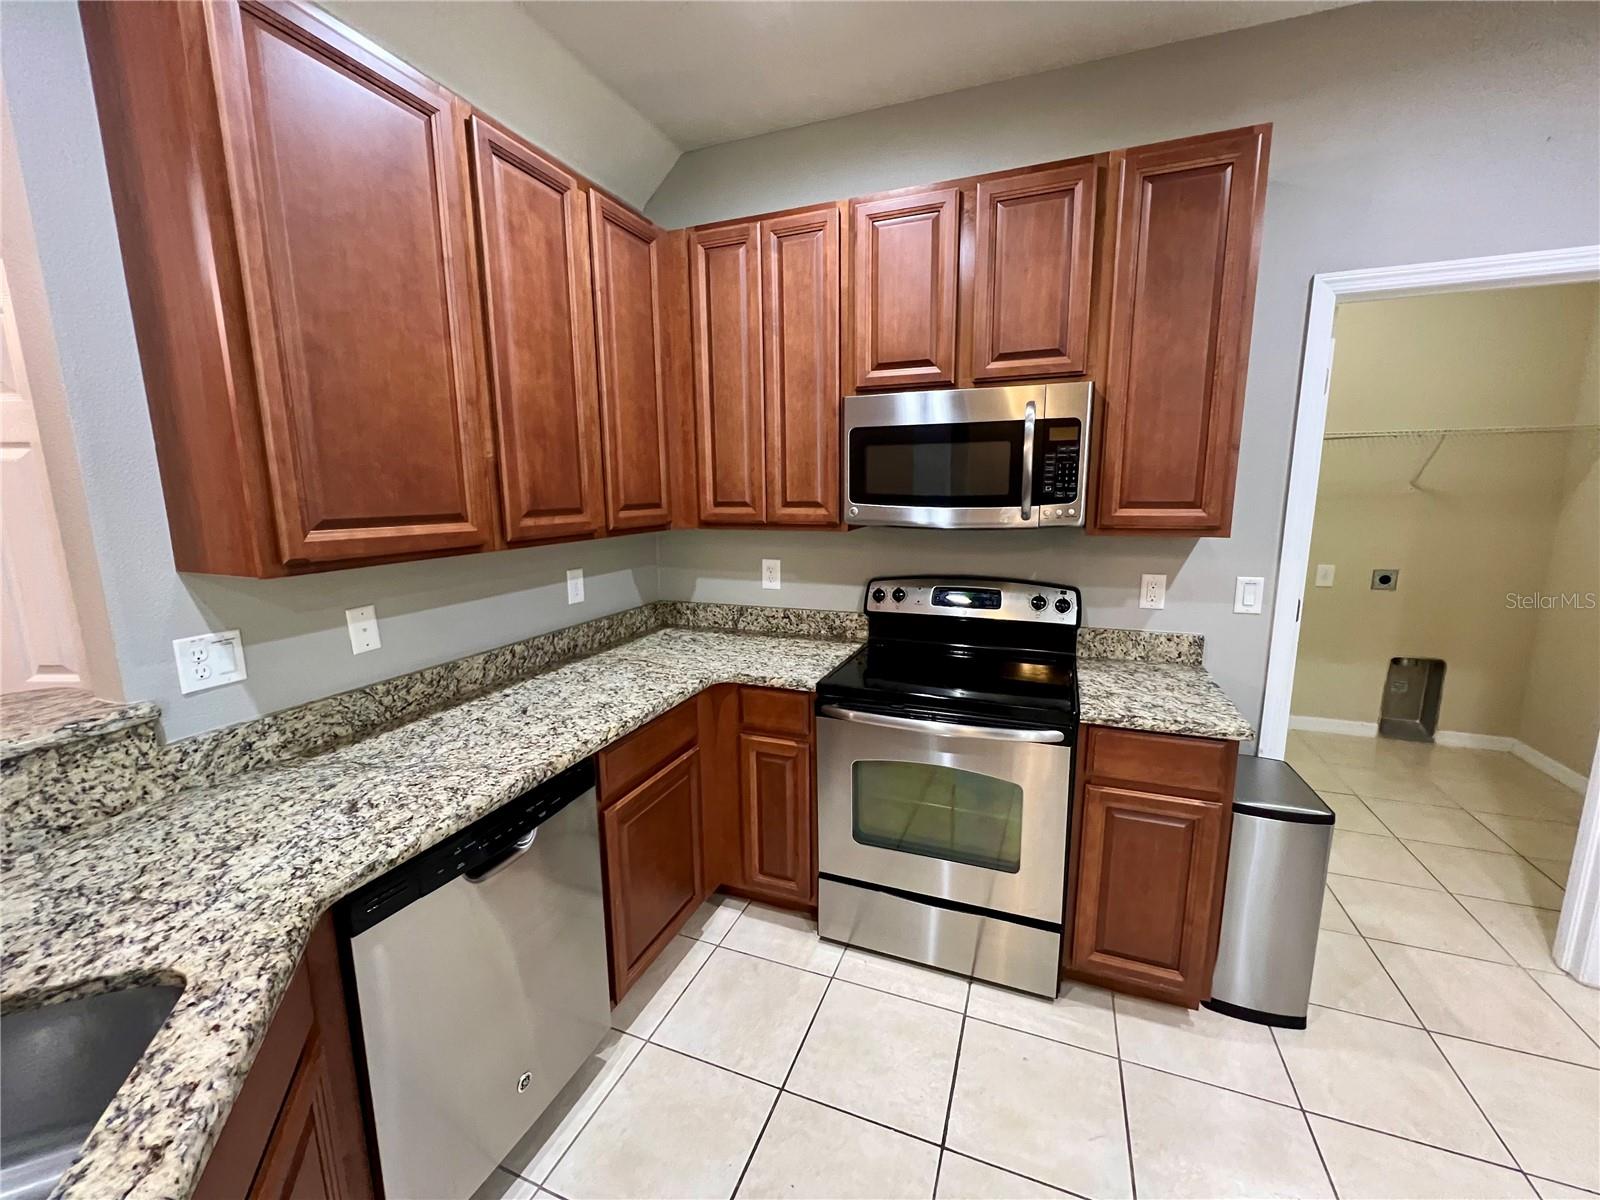 Beautiful spacious kitchen with stainless appliances